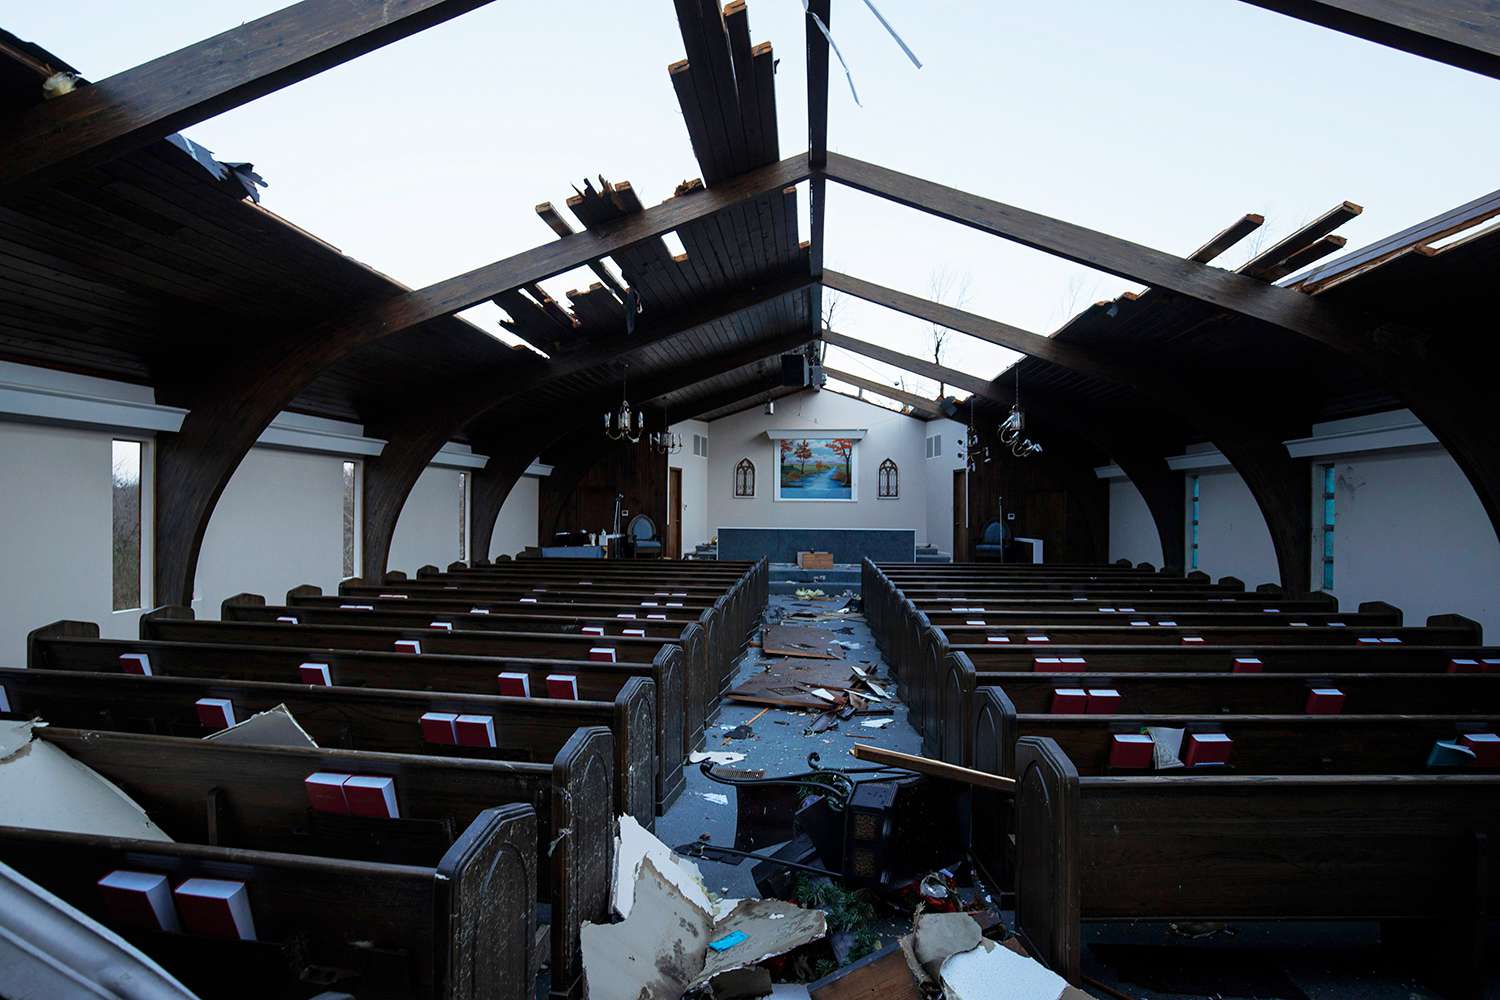 Interior view of tornado damage to Emmanuel Baptist Church on December 11, 2021 in Mayfield, Kentucky. Multiple tornadoes tore through parts of the lower Midwest late on Friday night, leaving a large path of destruction.